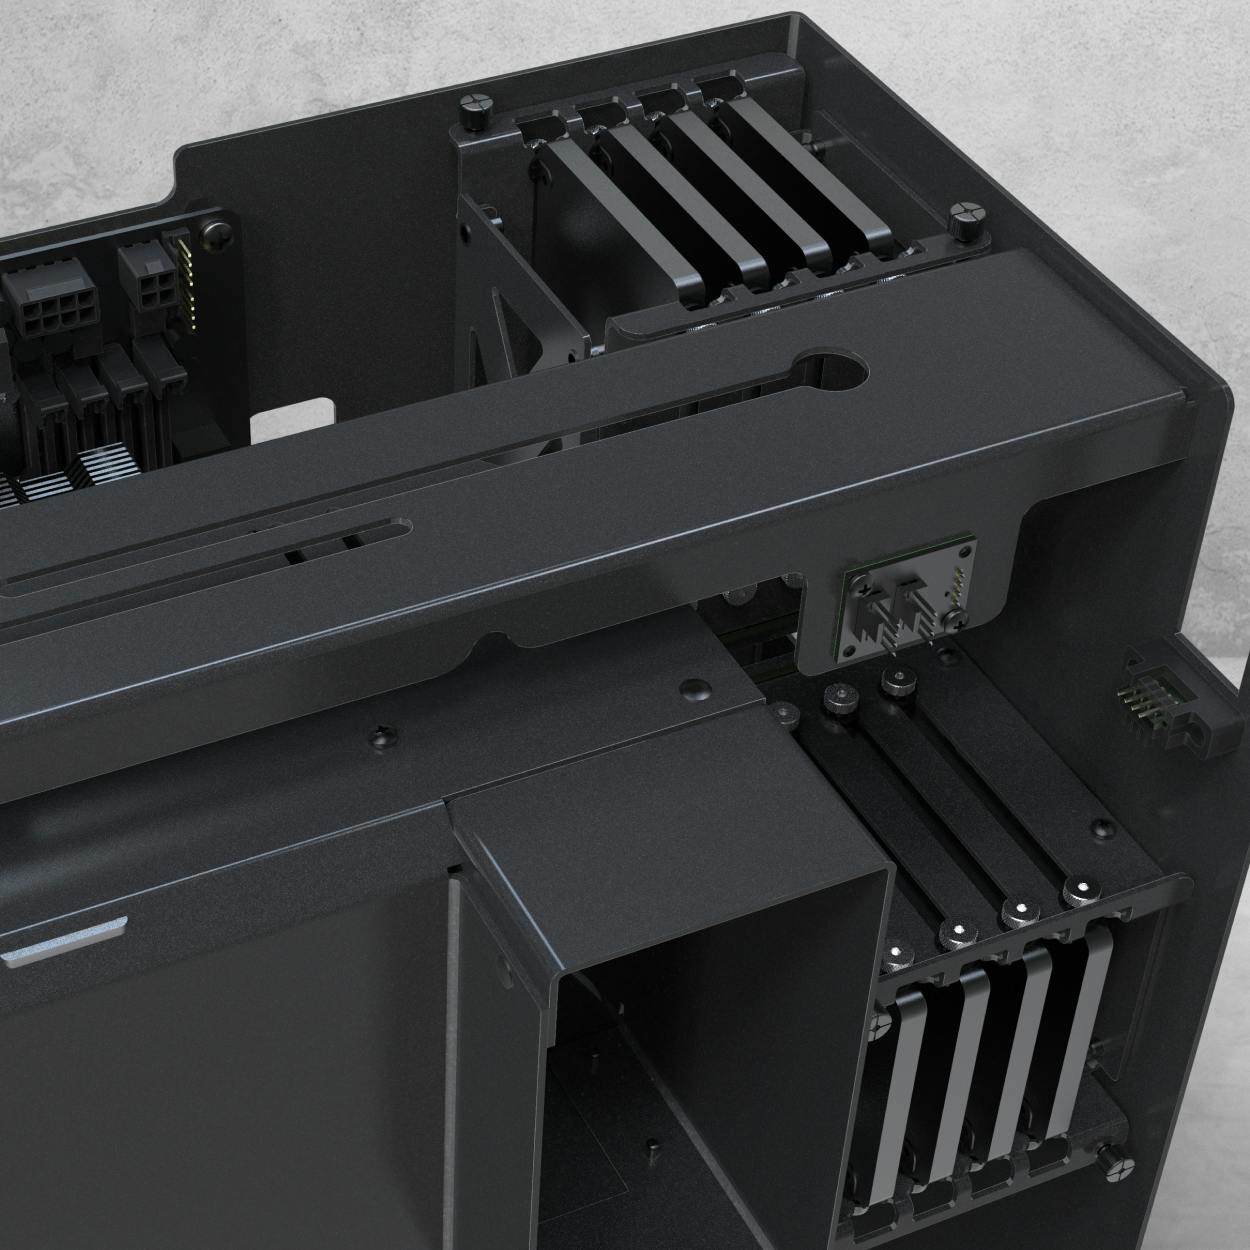 Storage drives inside the powder-coated aluminum cages.